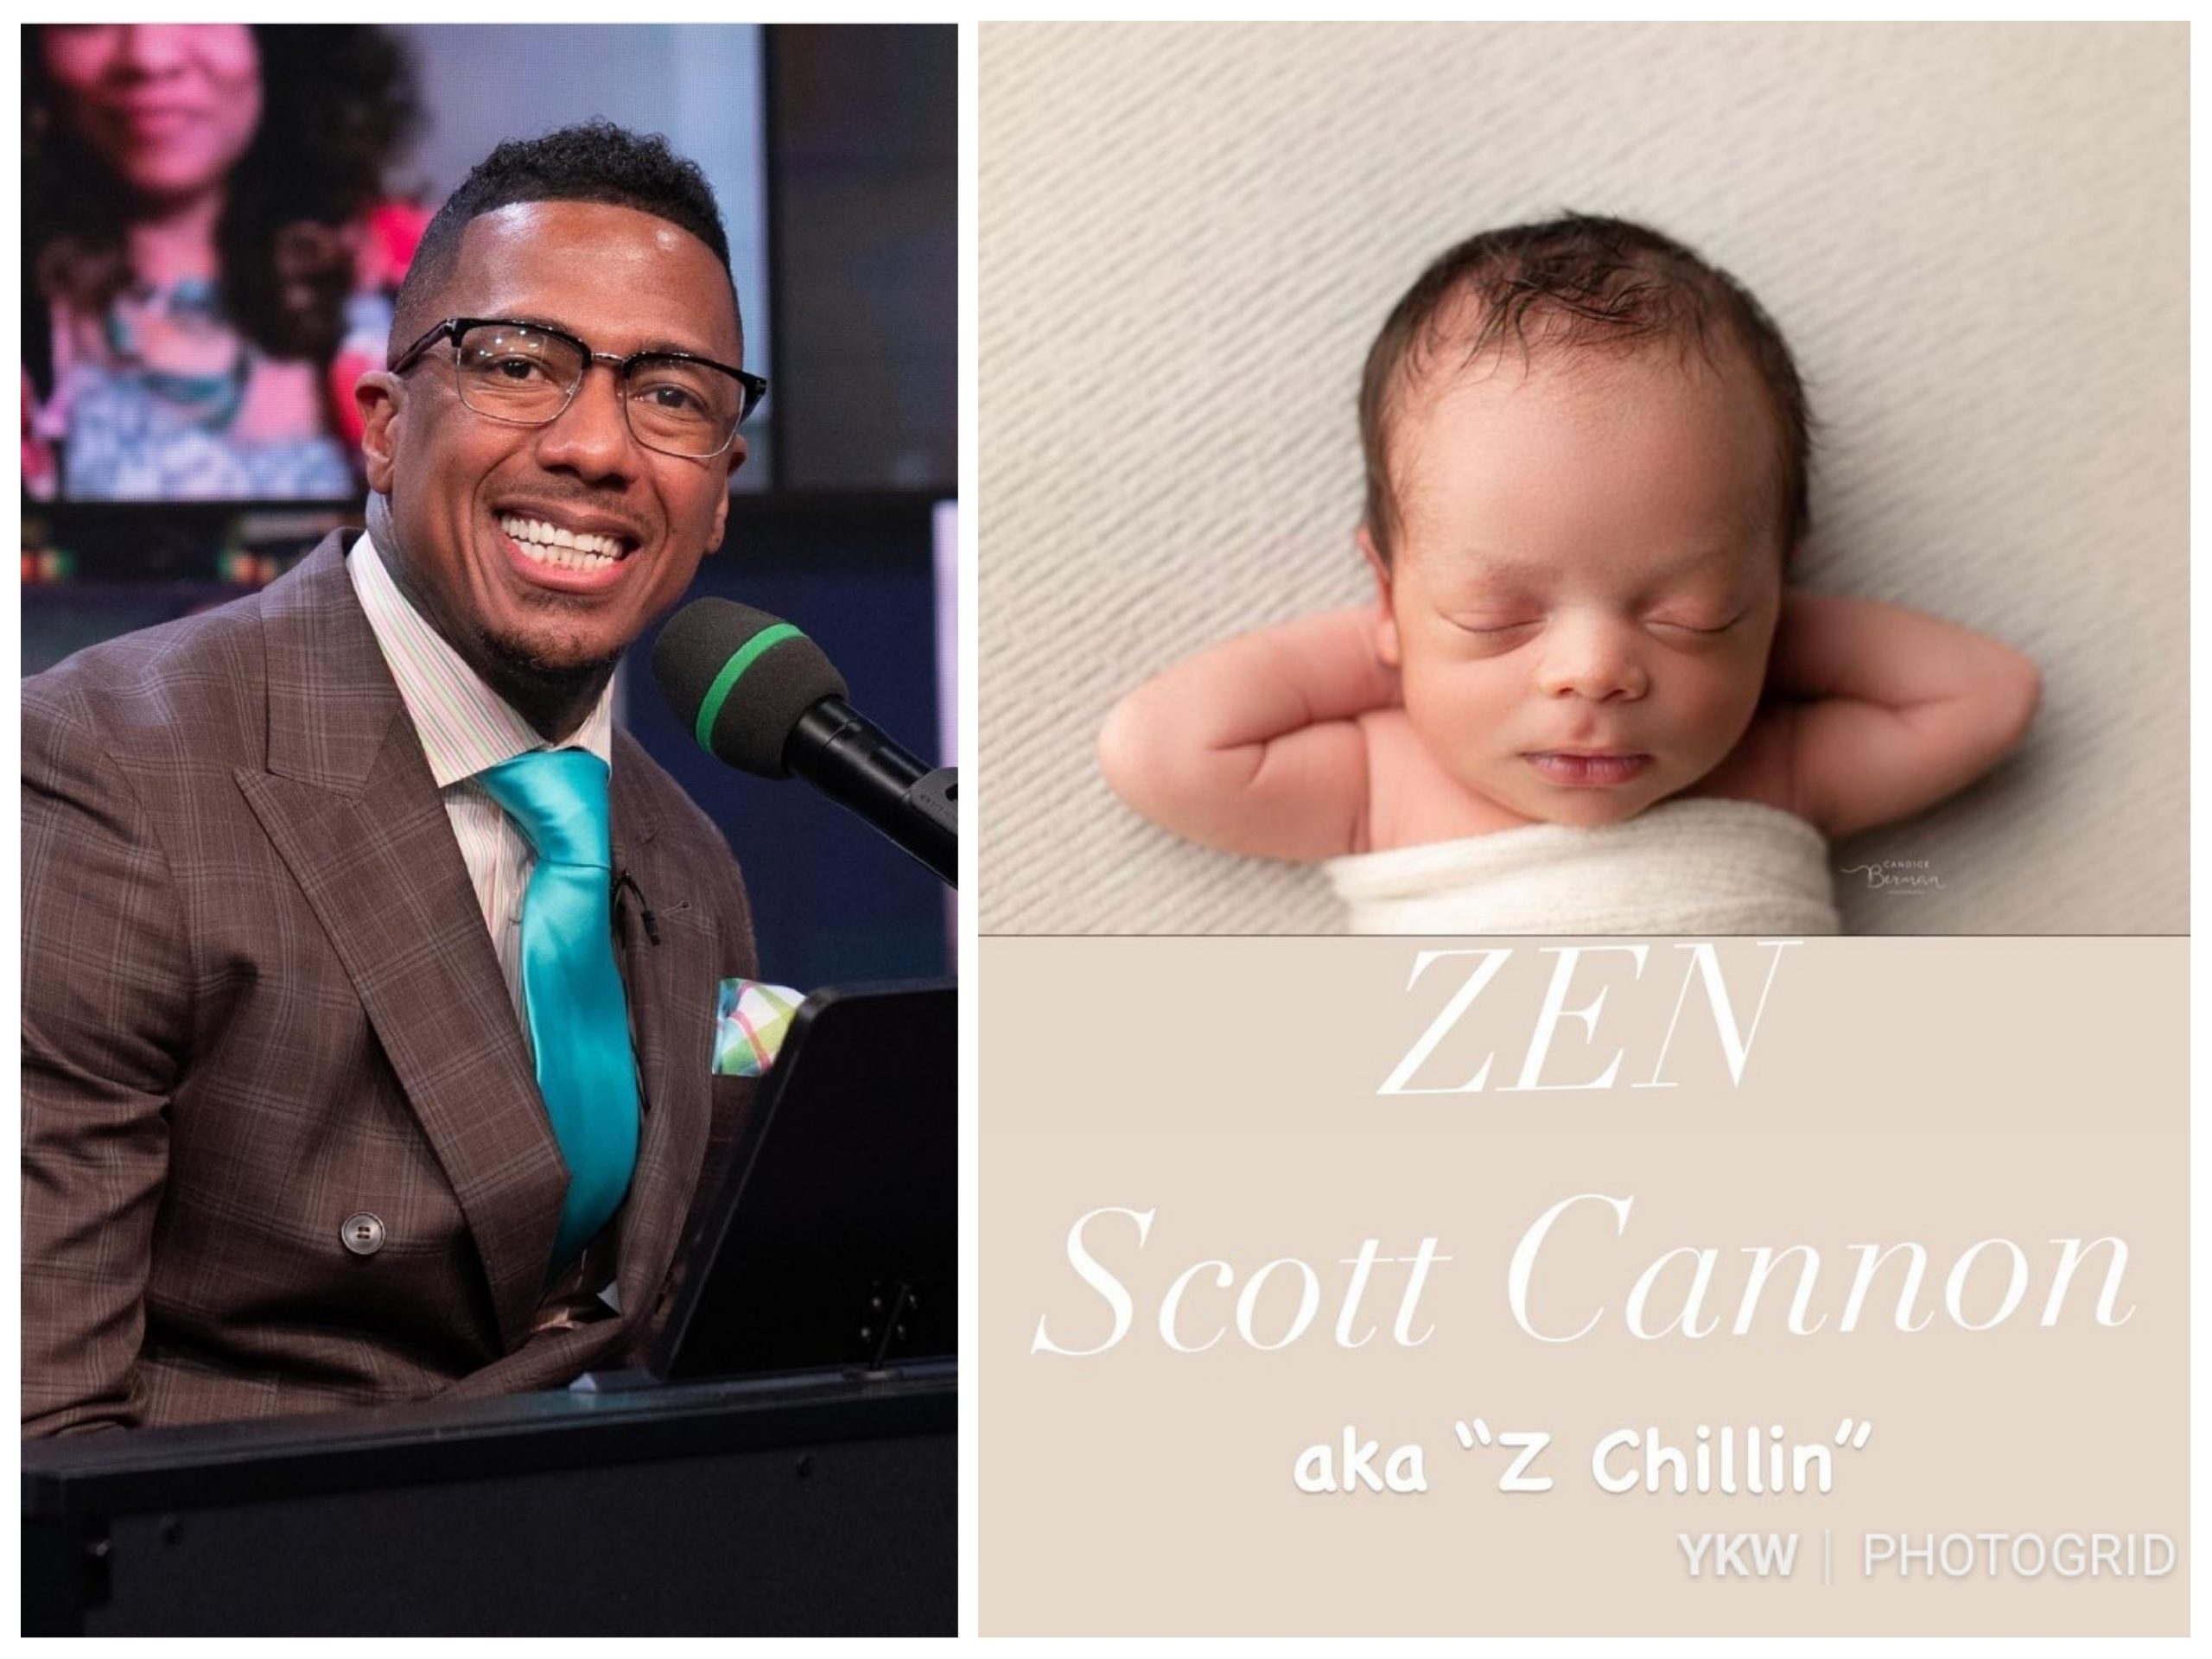 Nick Cannon Officially Introduces Baby #7